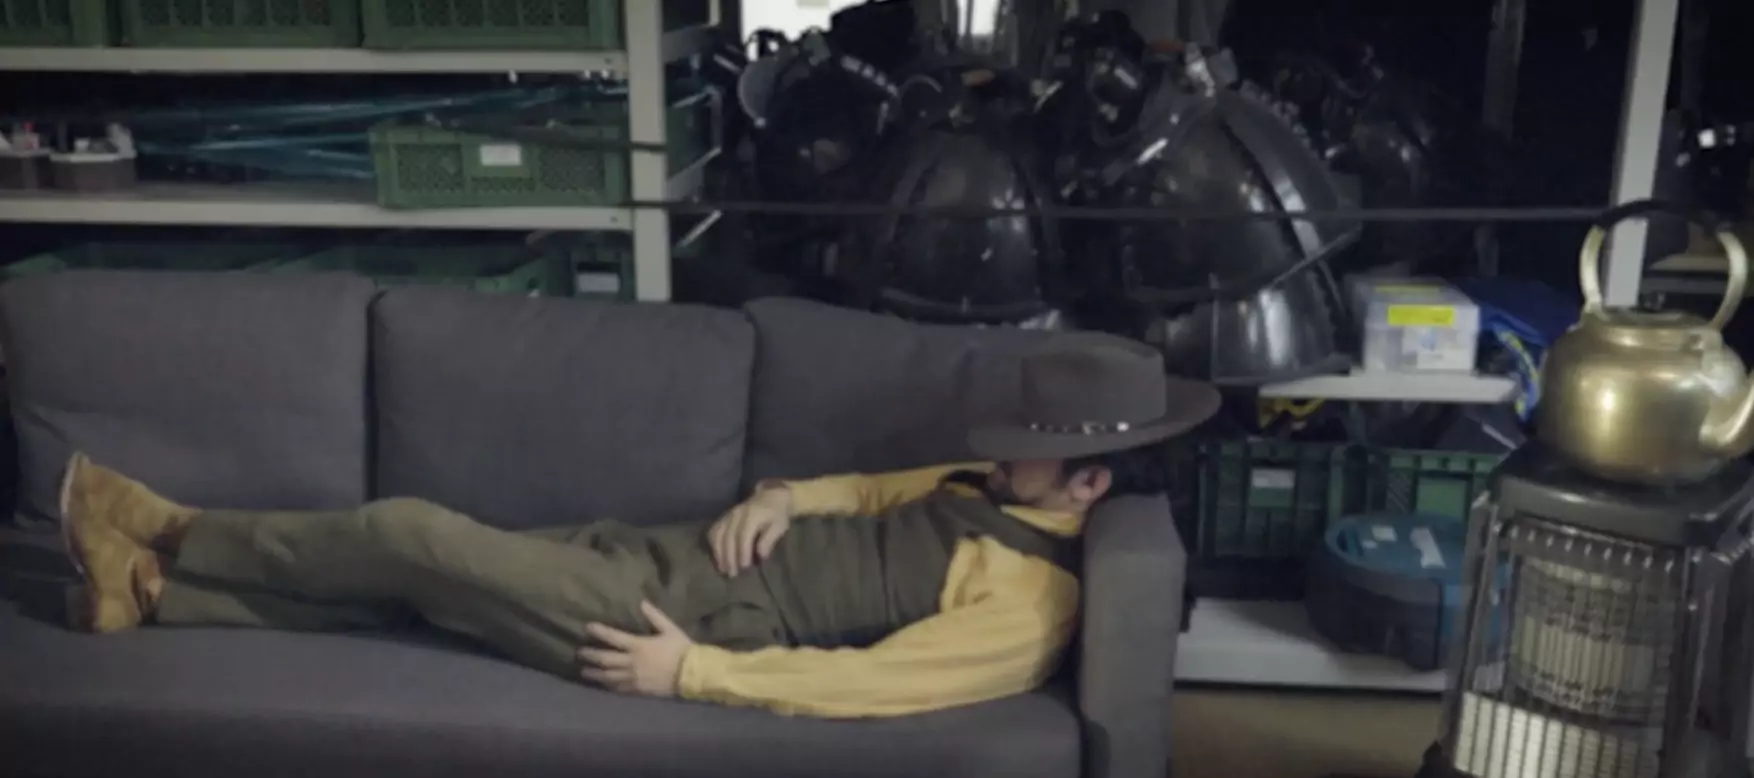 Screen capture from The Memphis Bell’s music video, showing a man in a stylish suit with cowboy had and boots lying on a couch in a warehouse filled with large lighting fixtures and a space heater with a large kettle. 